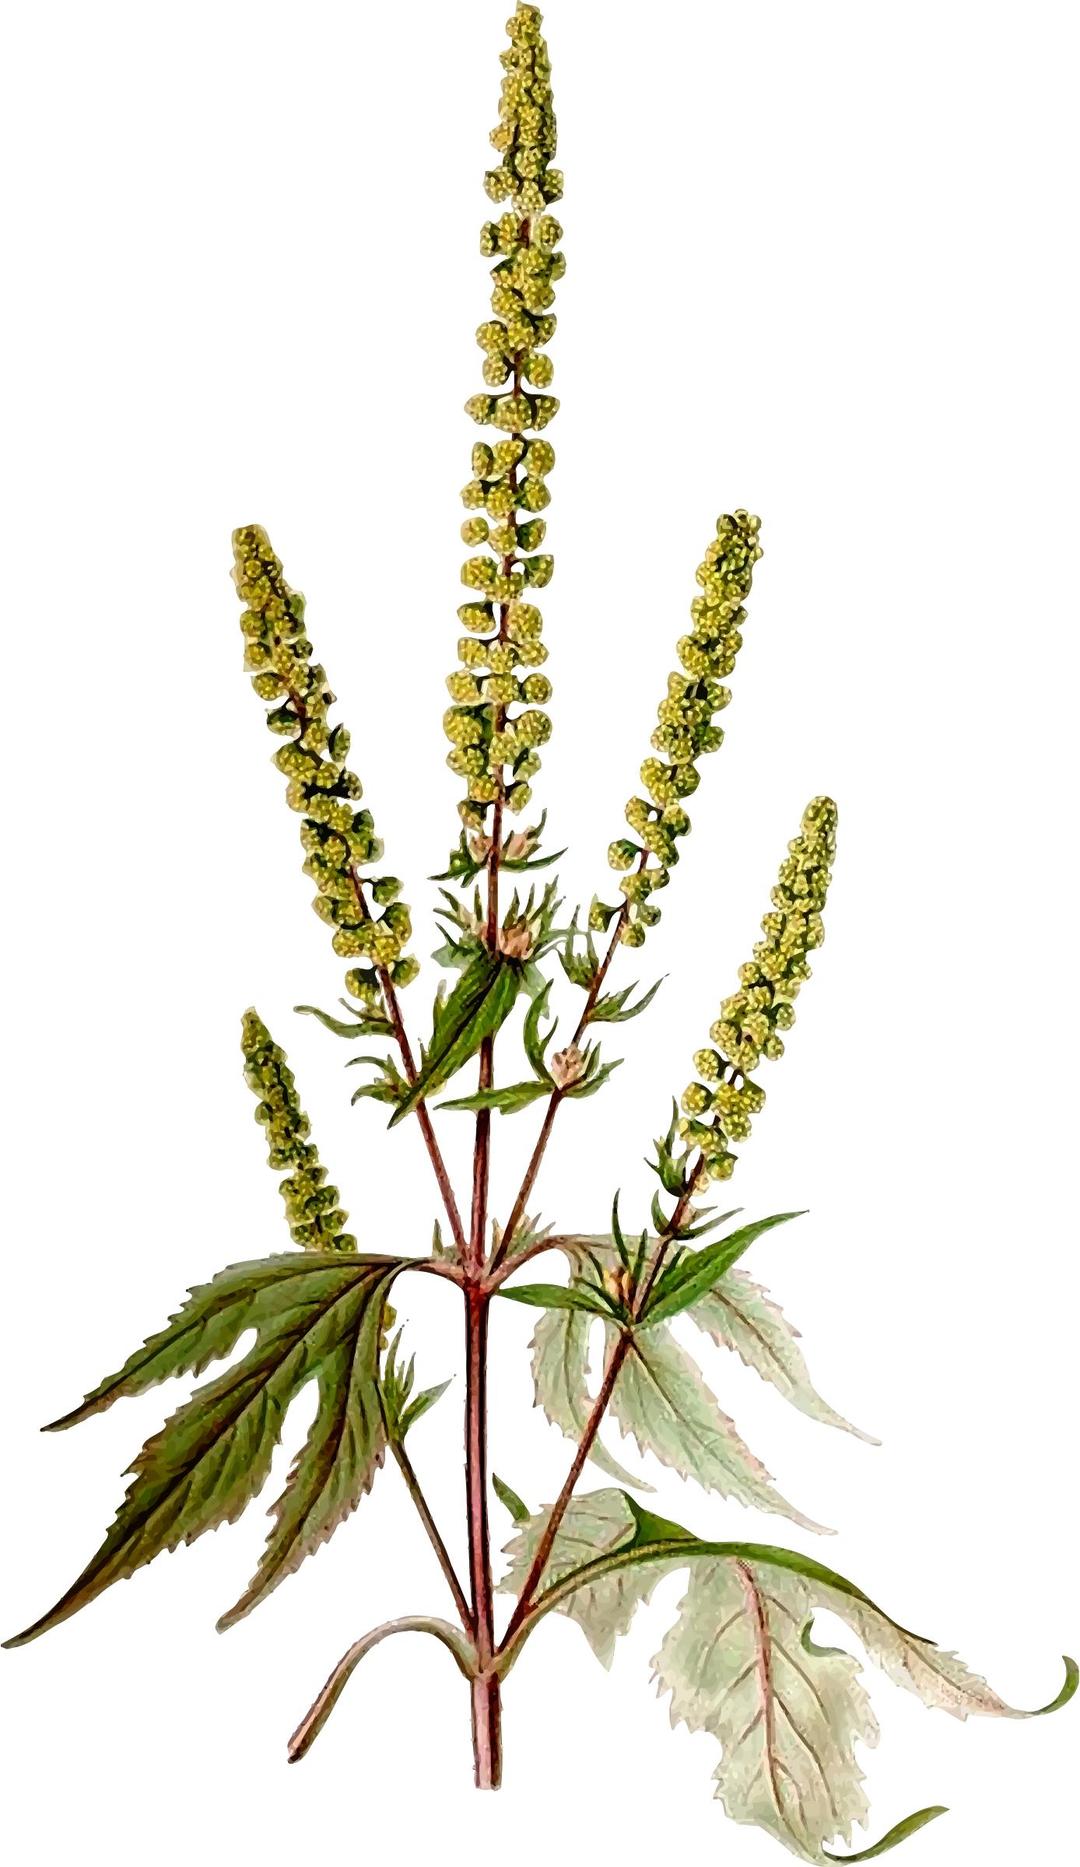 Giant ragweed png transparent